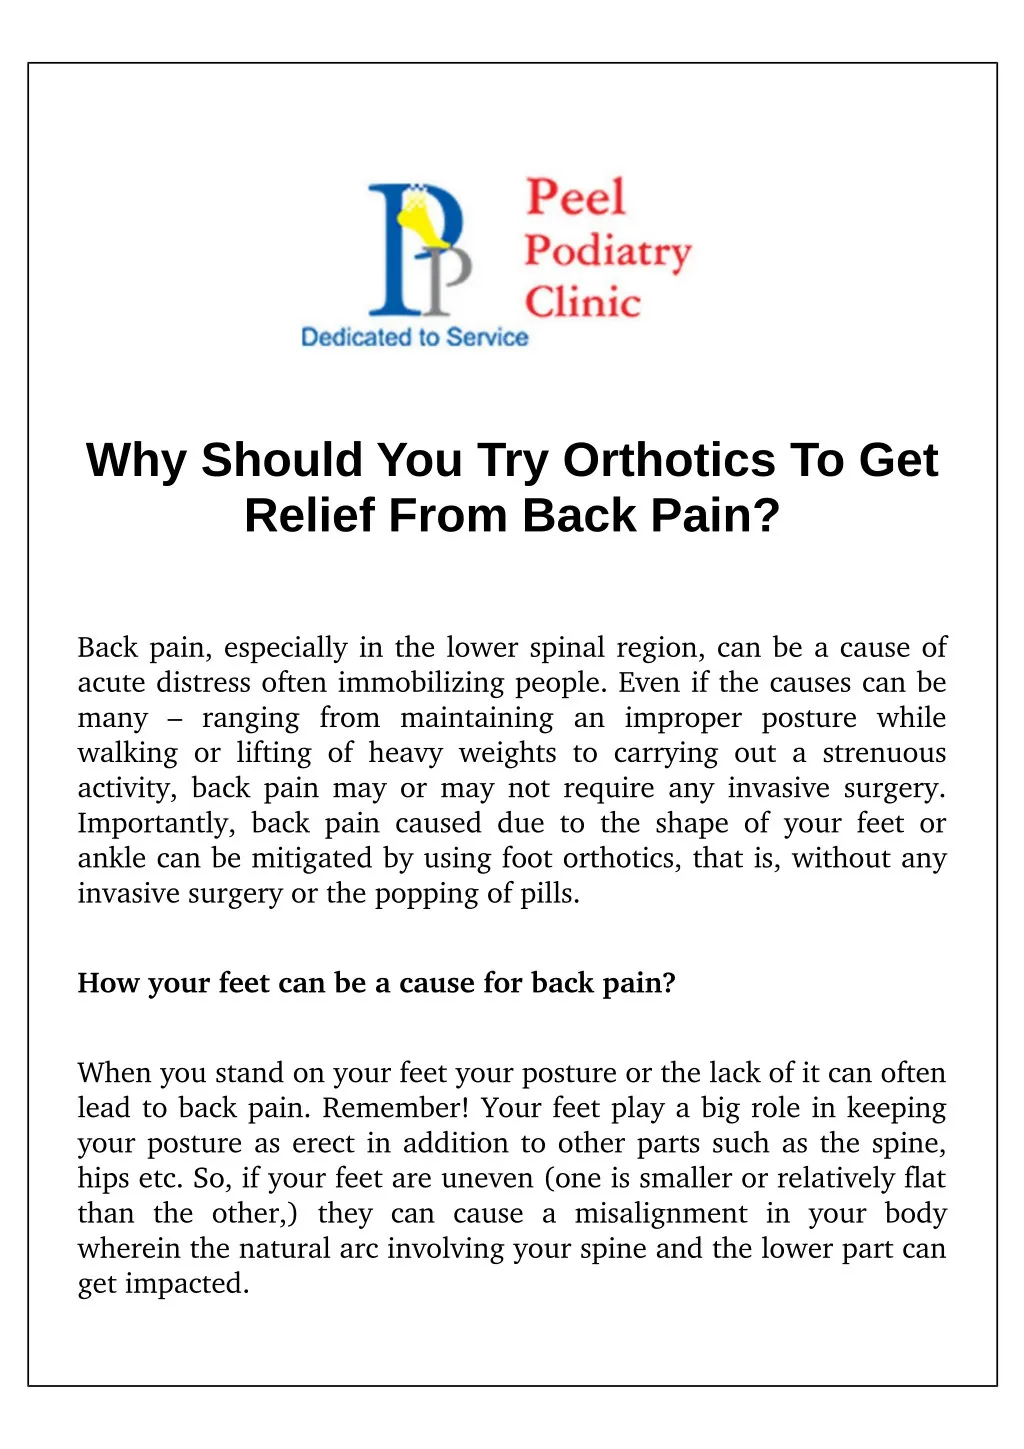 why should you try orthotics to get relief from